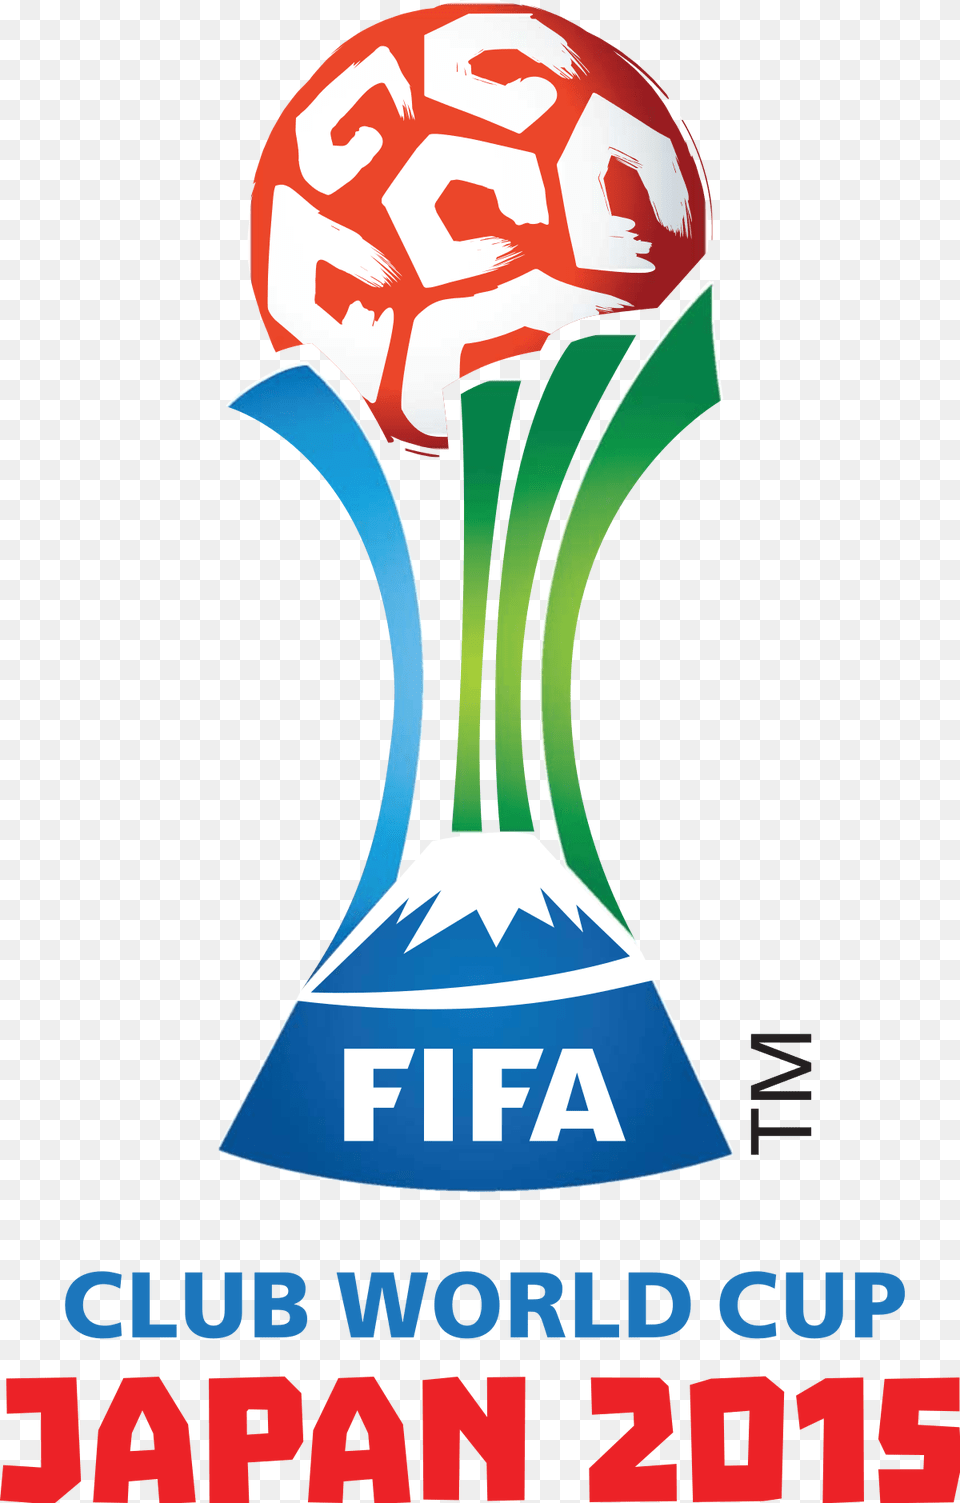 Fifa Club World Cup 2015 Logo, Advertisement, Poster, Dynamite, Weapon Png